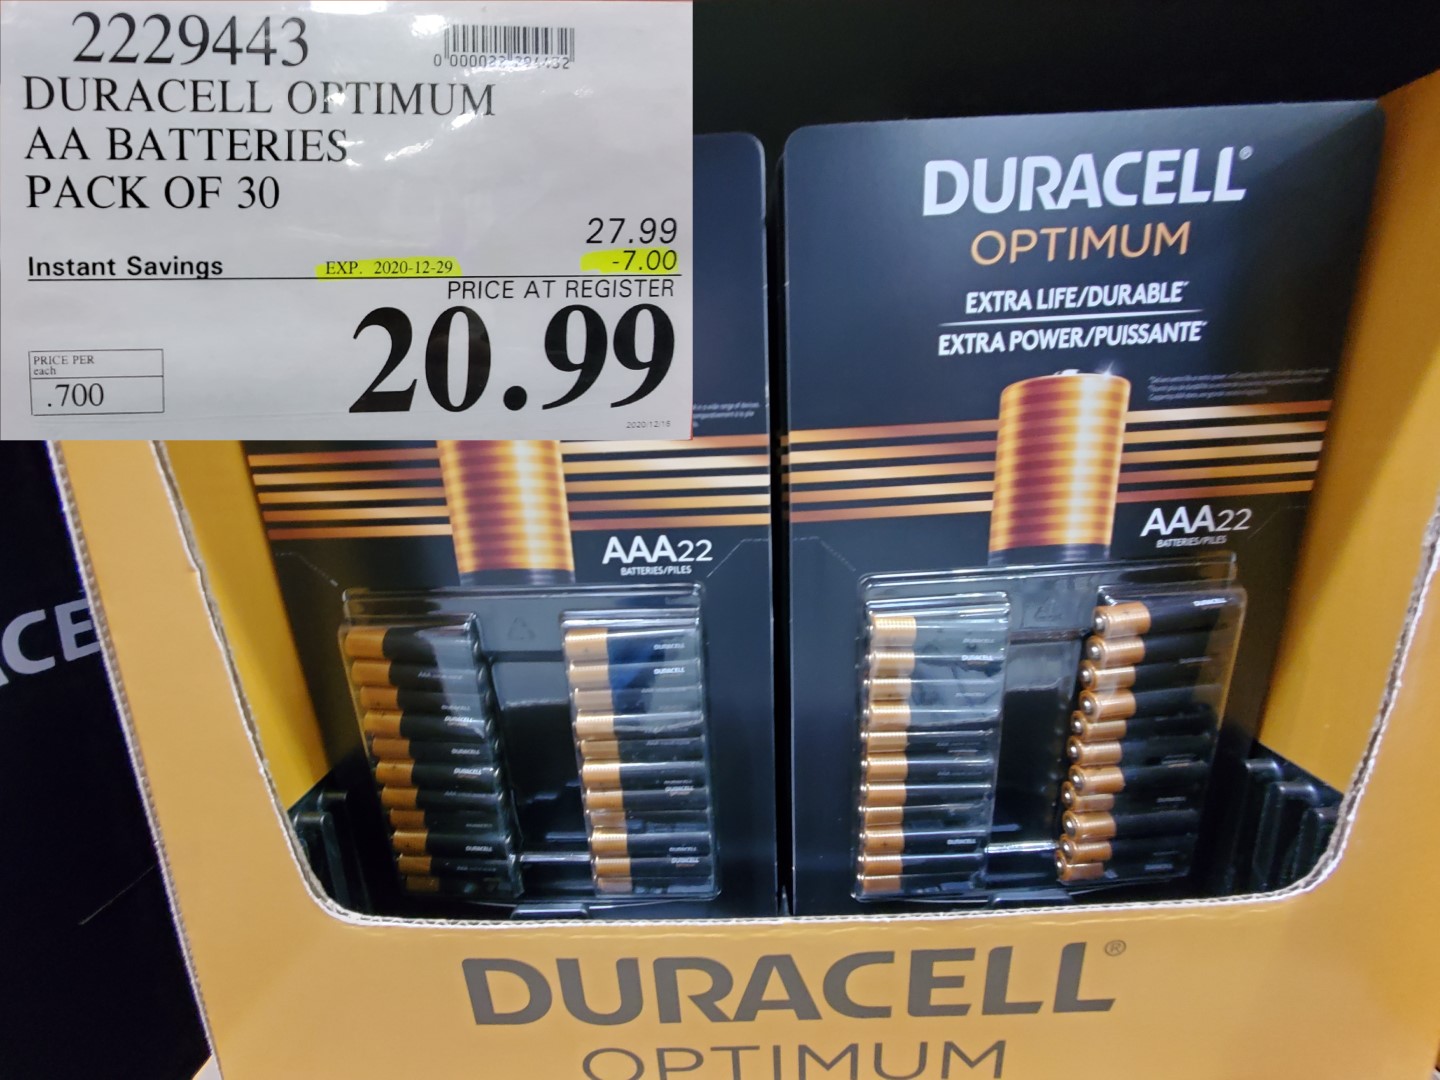 Duracell Optimum Batteries Pack Of 30 7 00 Instant Savings Expires On 12 29 99 Costco East Fan Blog